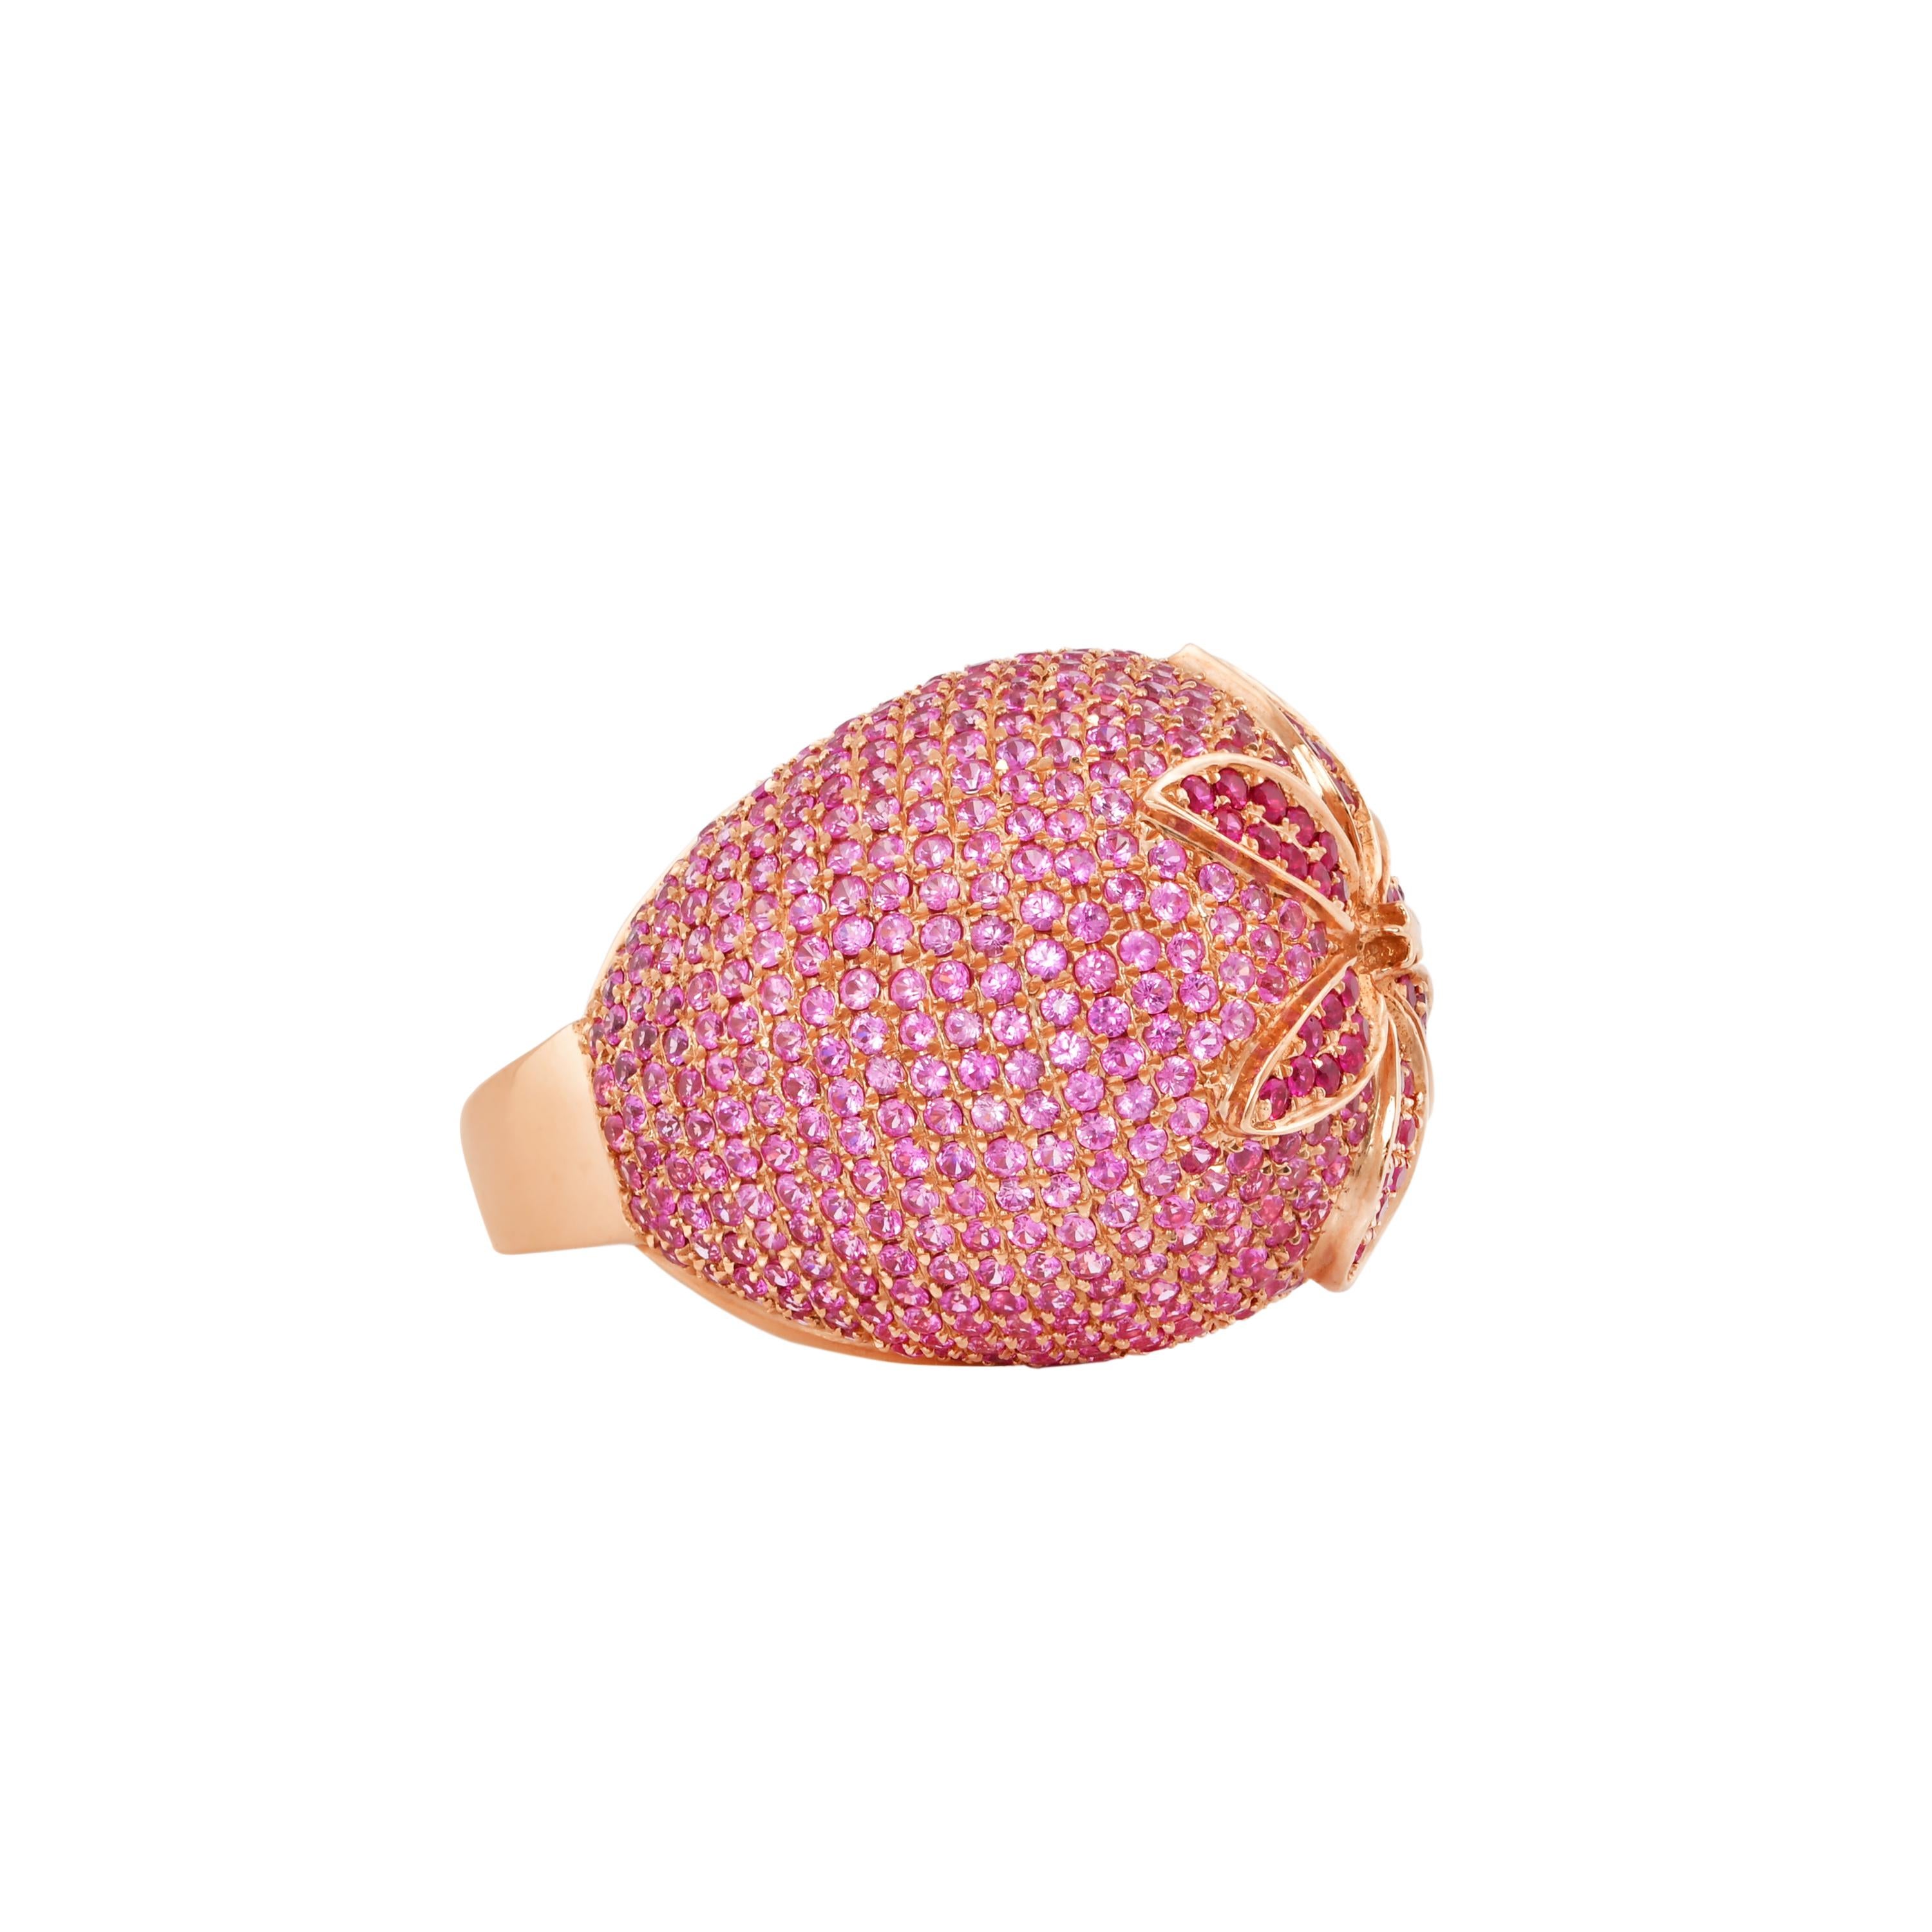 Floral 5.2 Carat Ruby and Pink Sapphire Ring in 14 Karat Rose Gold For Sale 2